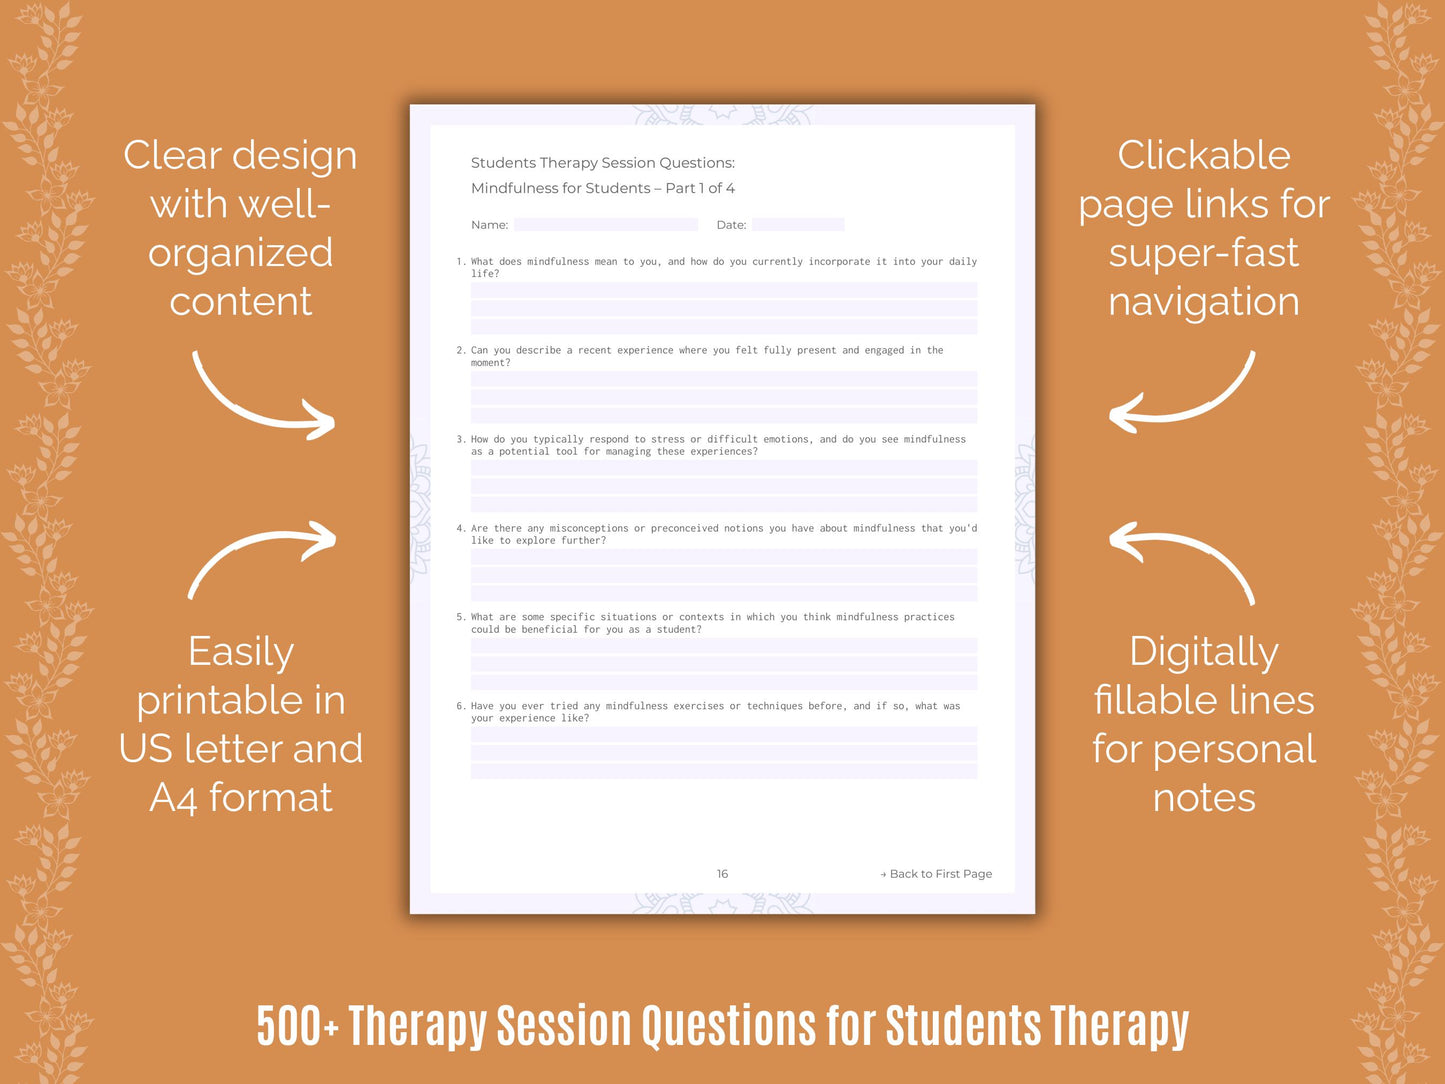 Students Therapy Session Questions Resource